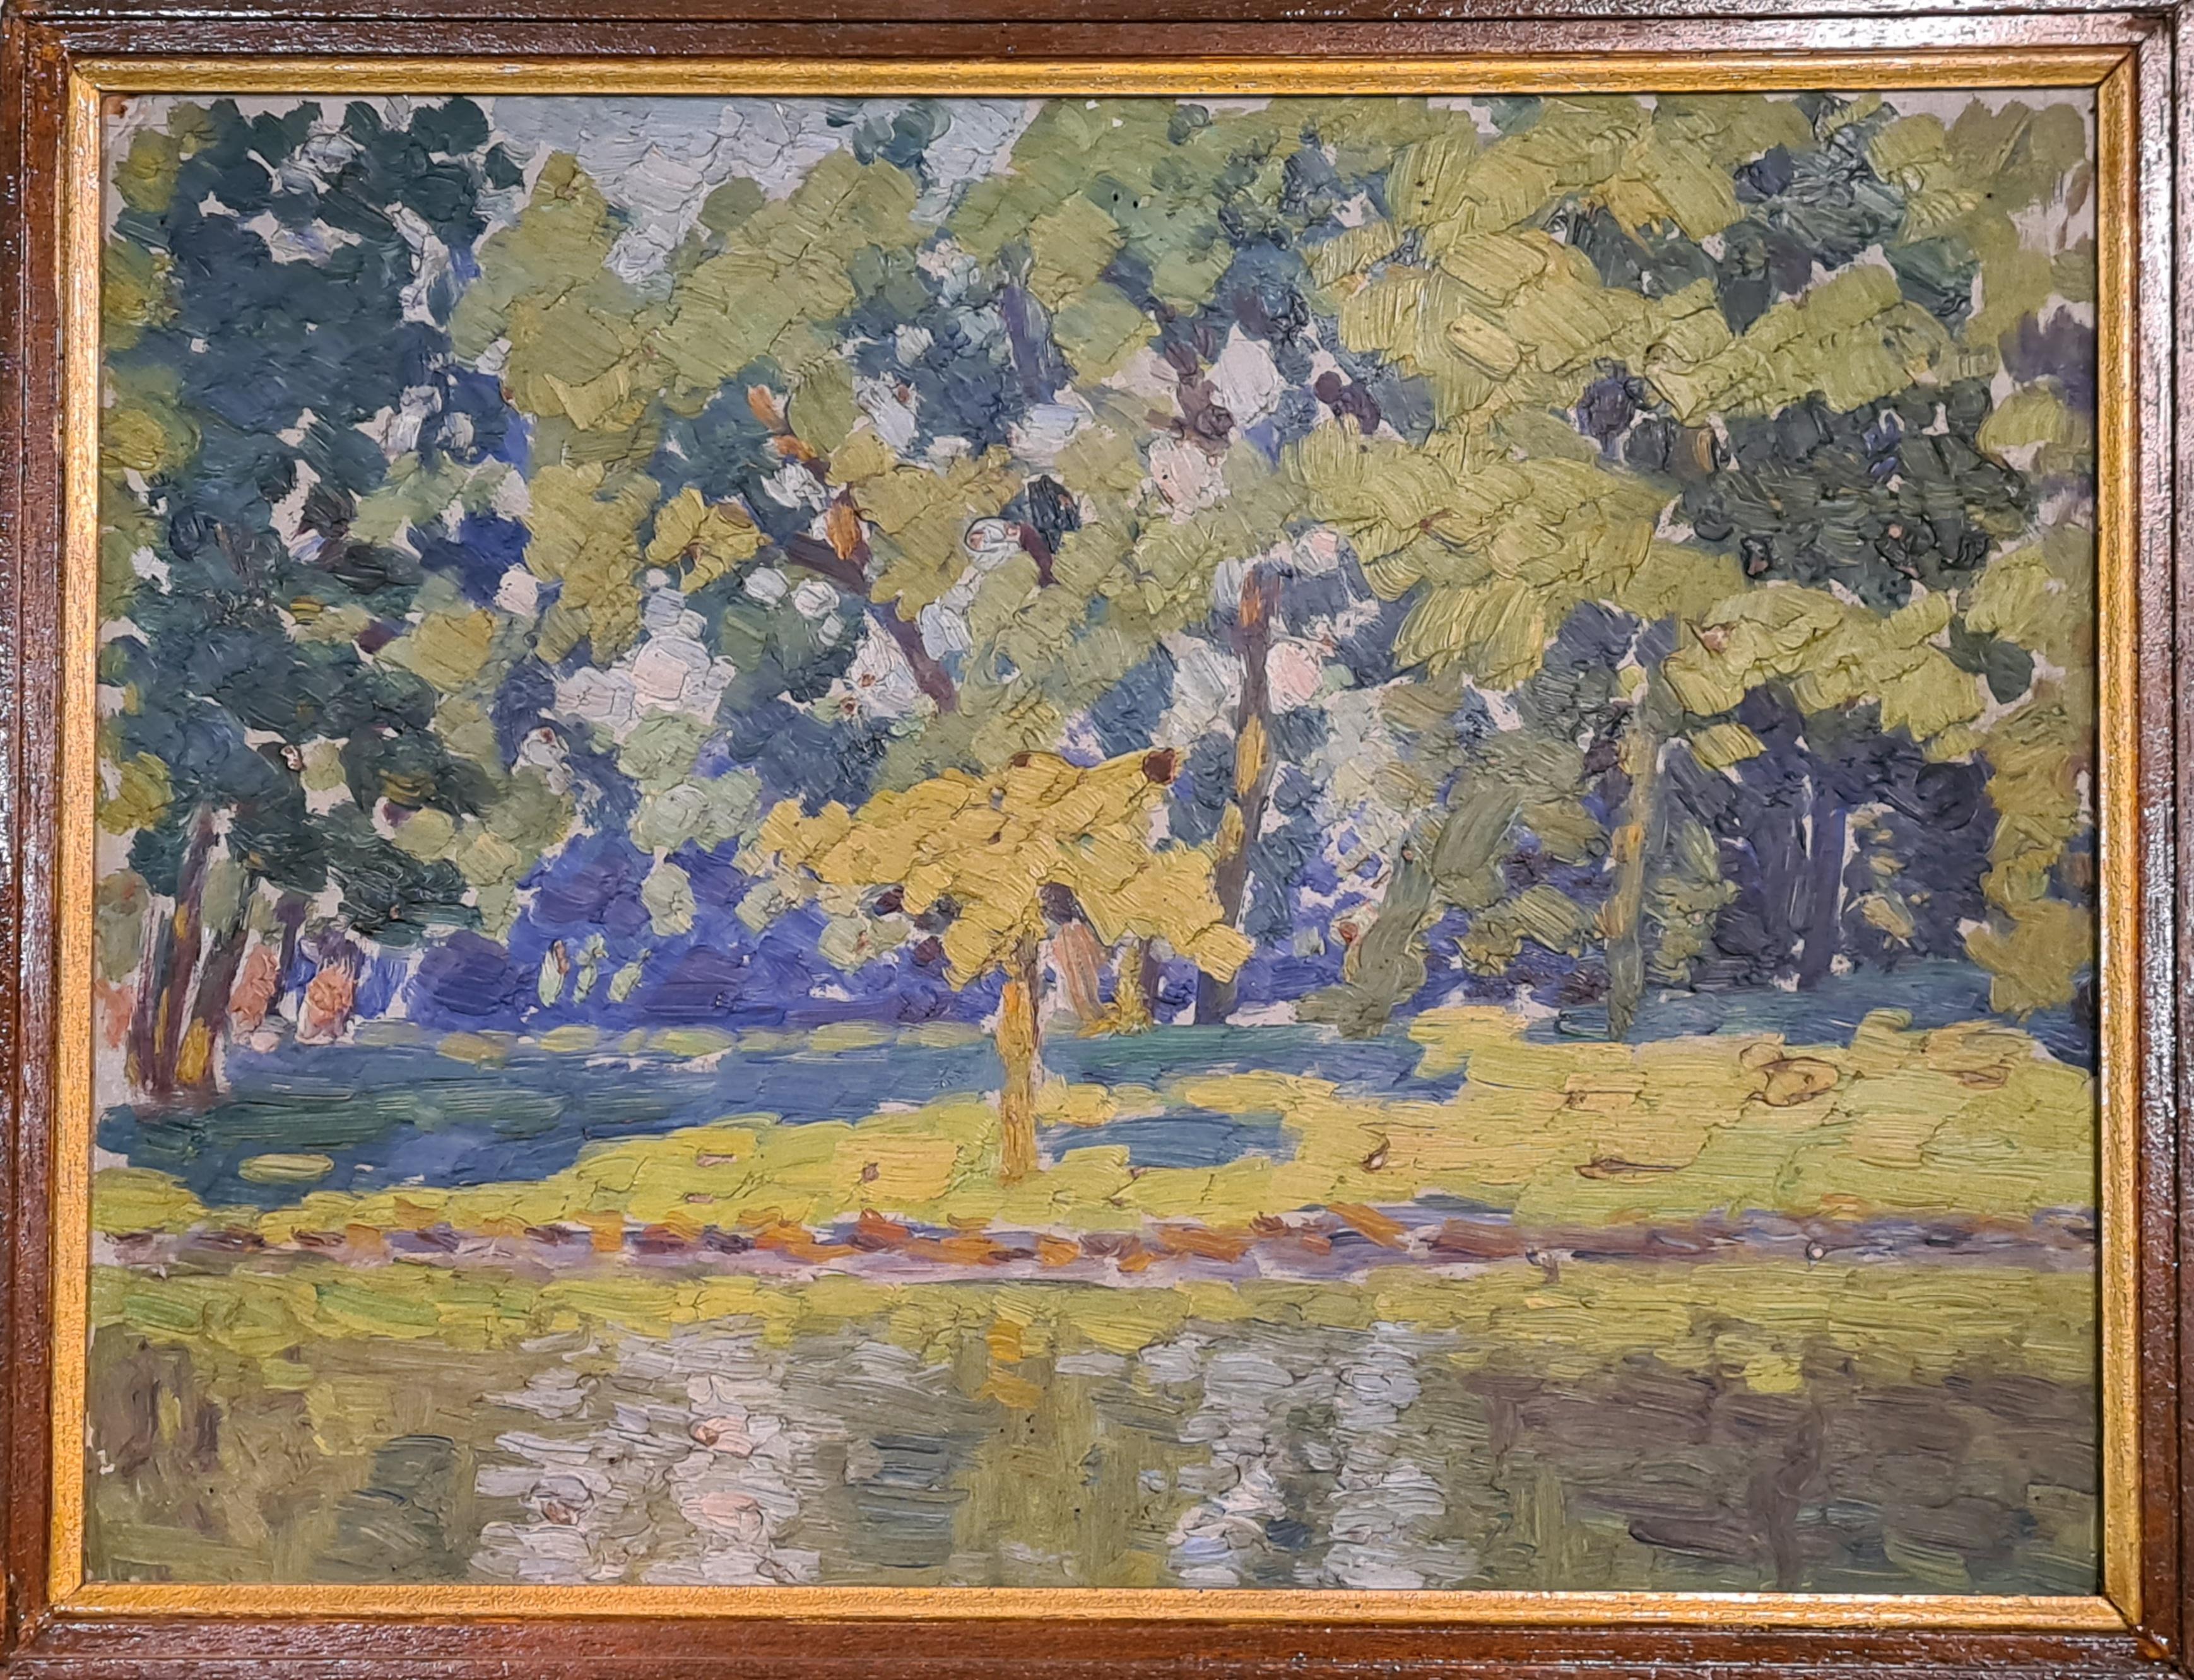 Michel Dufet Landscape Painting - Early 20th C. Barbizon School, The River Bank. Oil on Board.